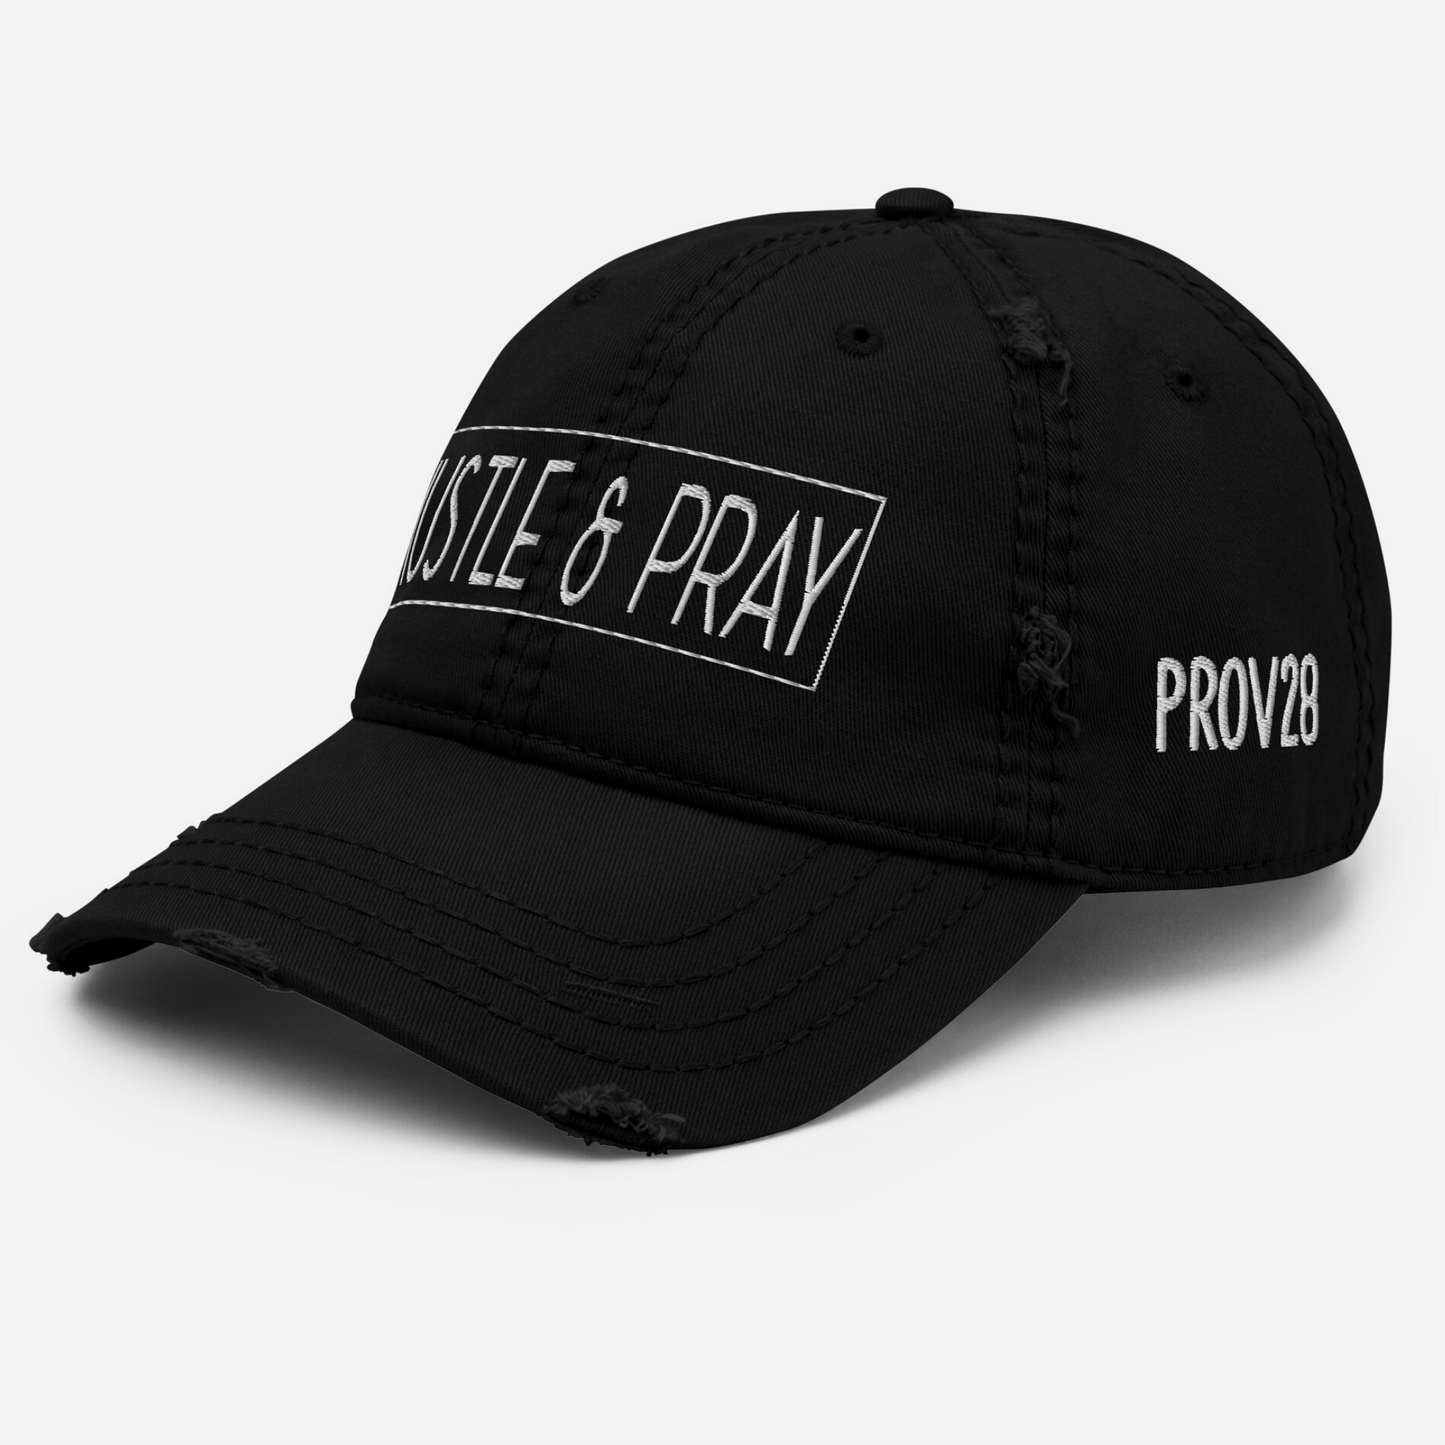 HUSTLE & PRAY - White On Black Embroidered Distressed Dad Hat